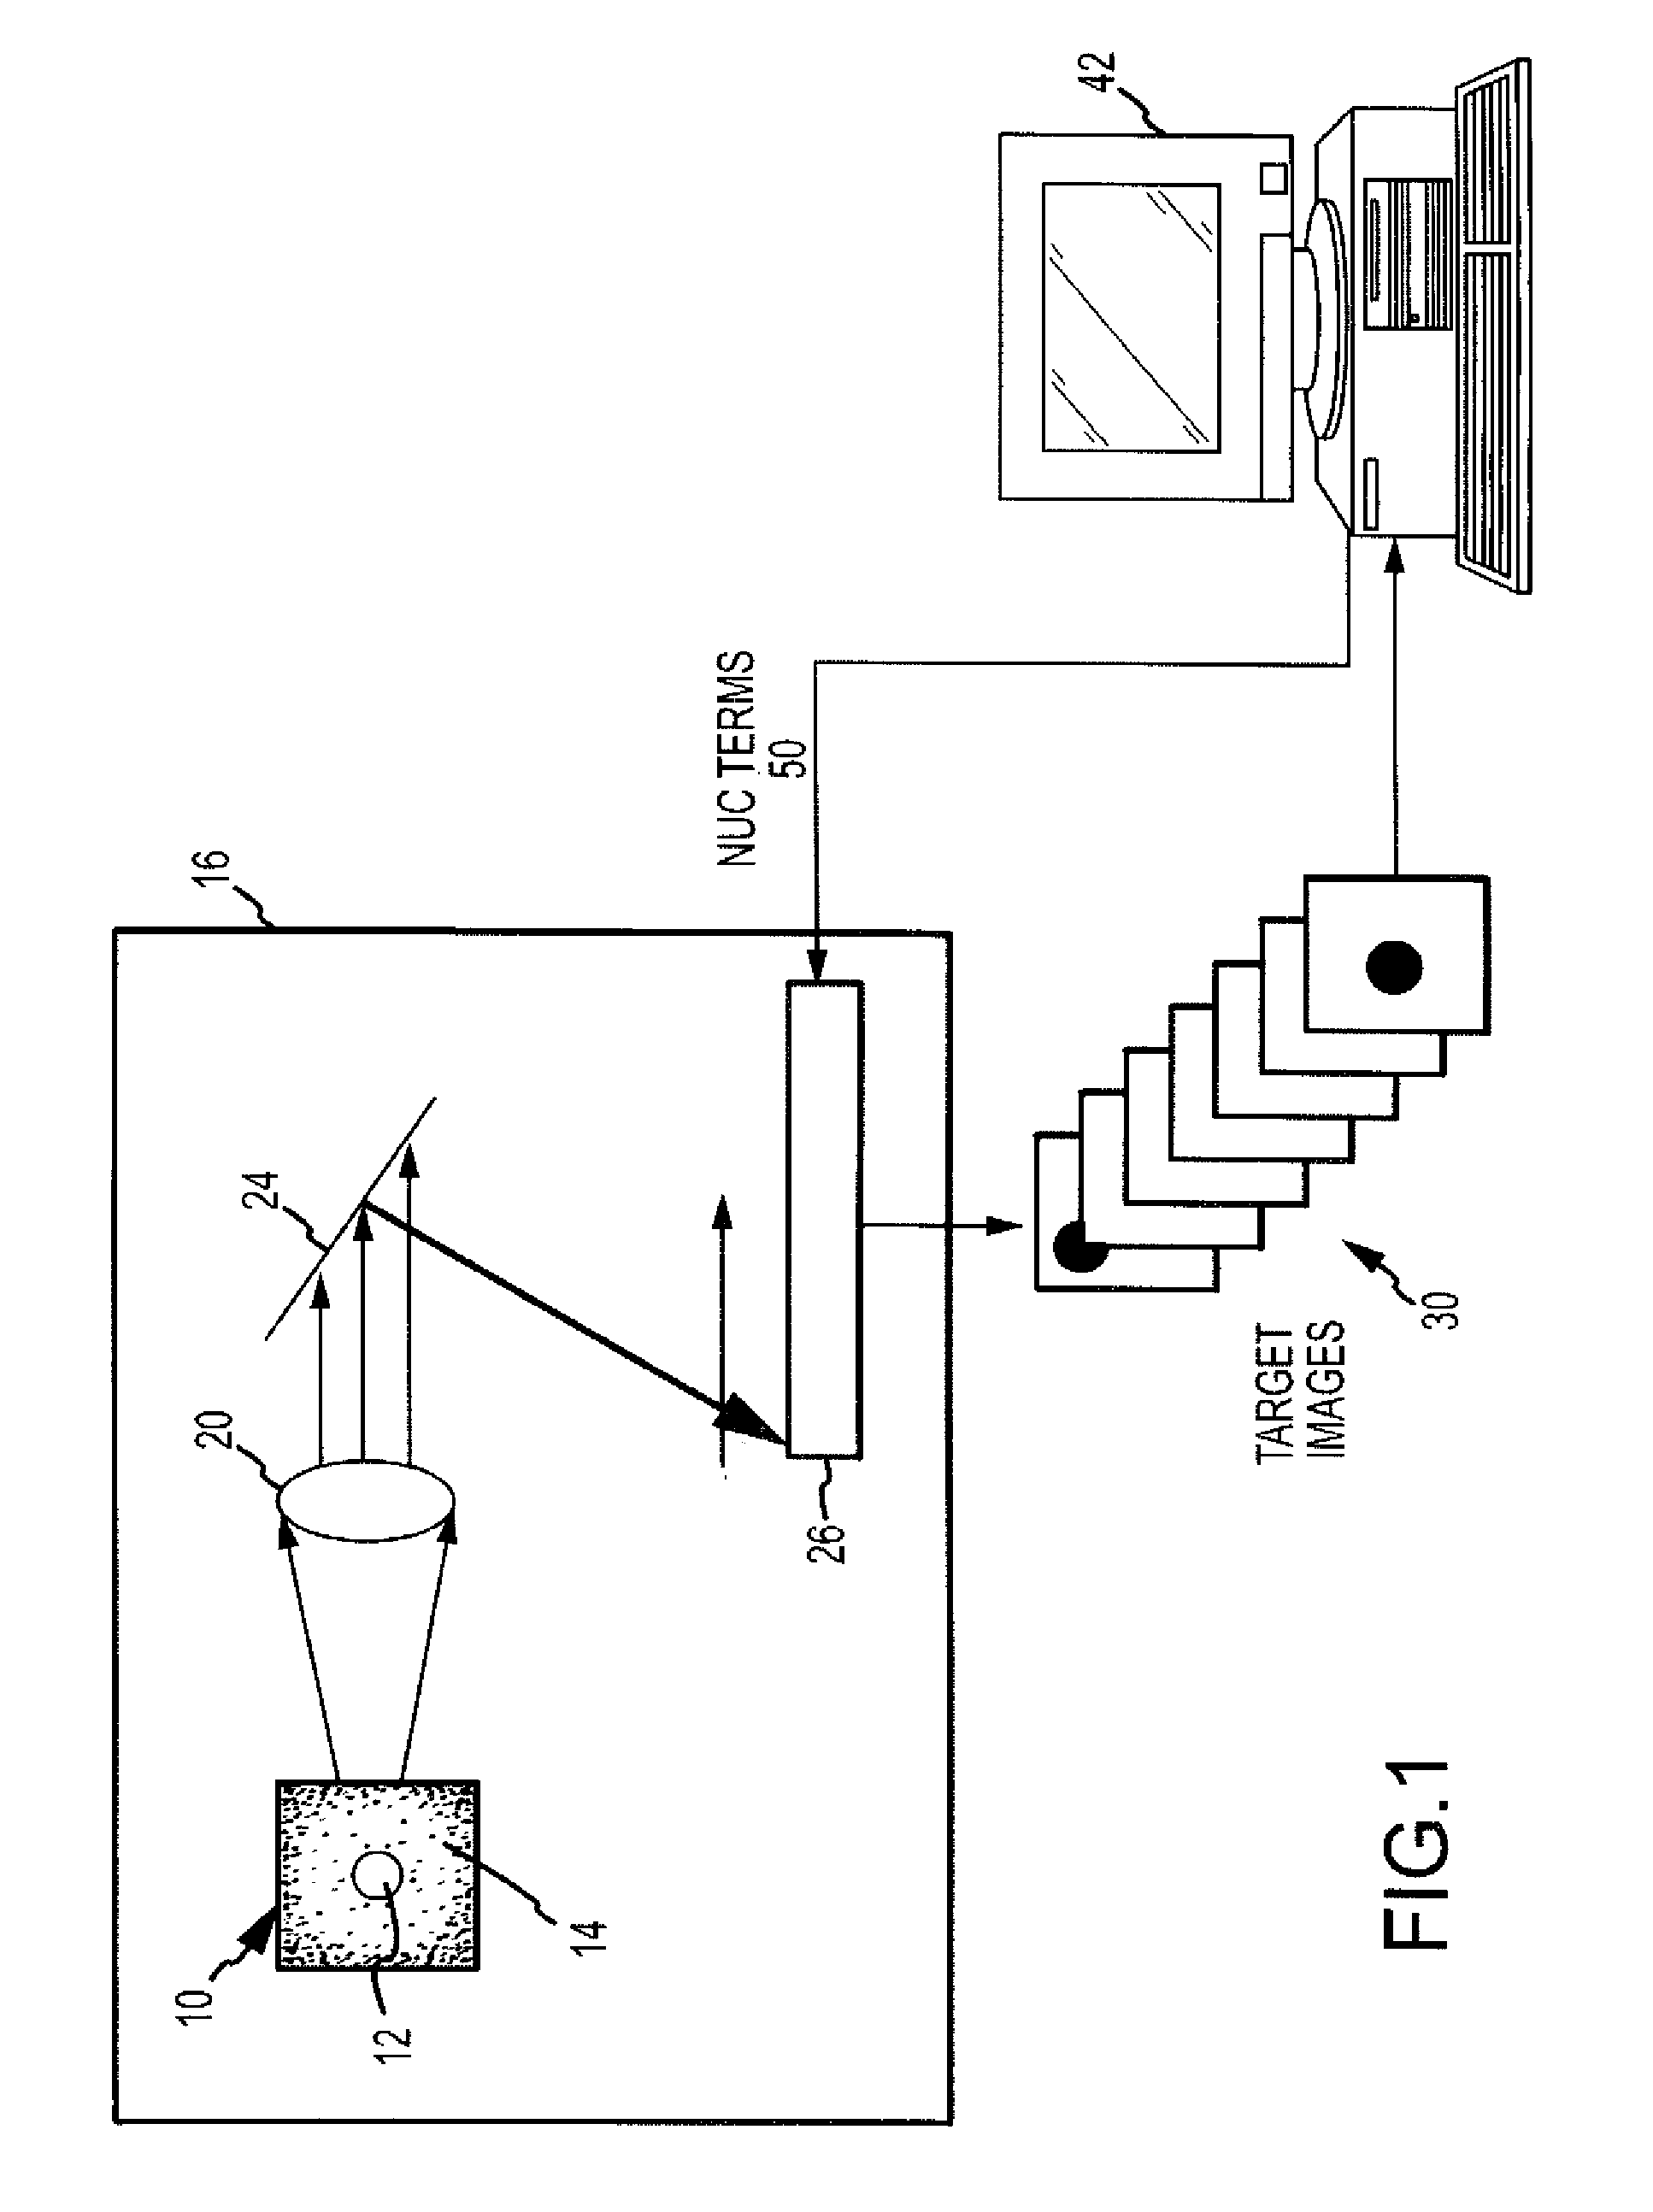 System and method of moving target based calibration of non-uniformity compensation for optical imagers